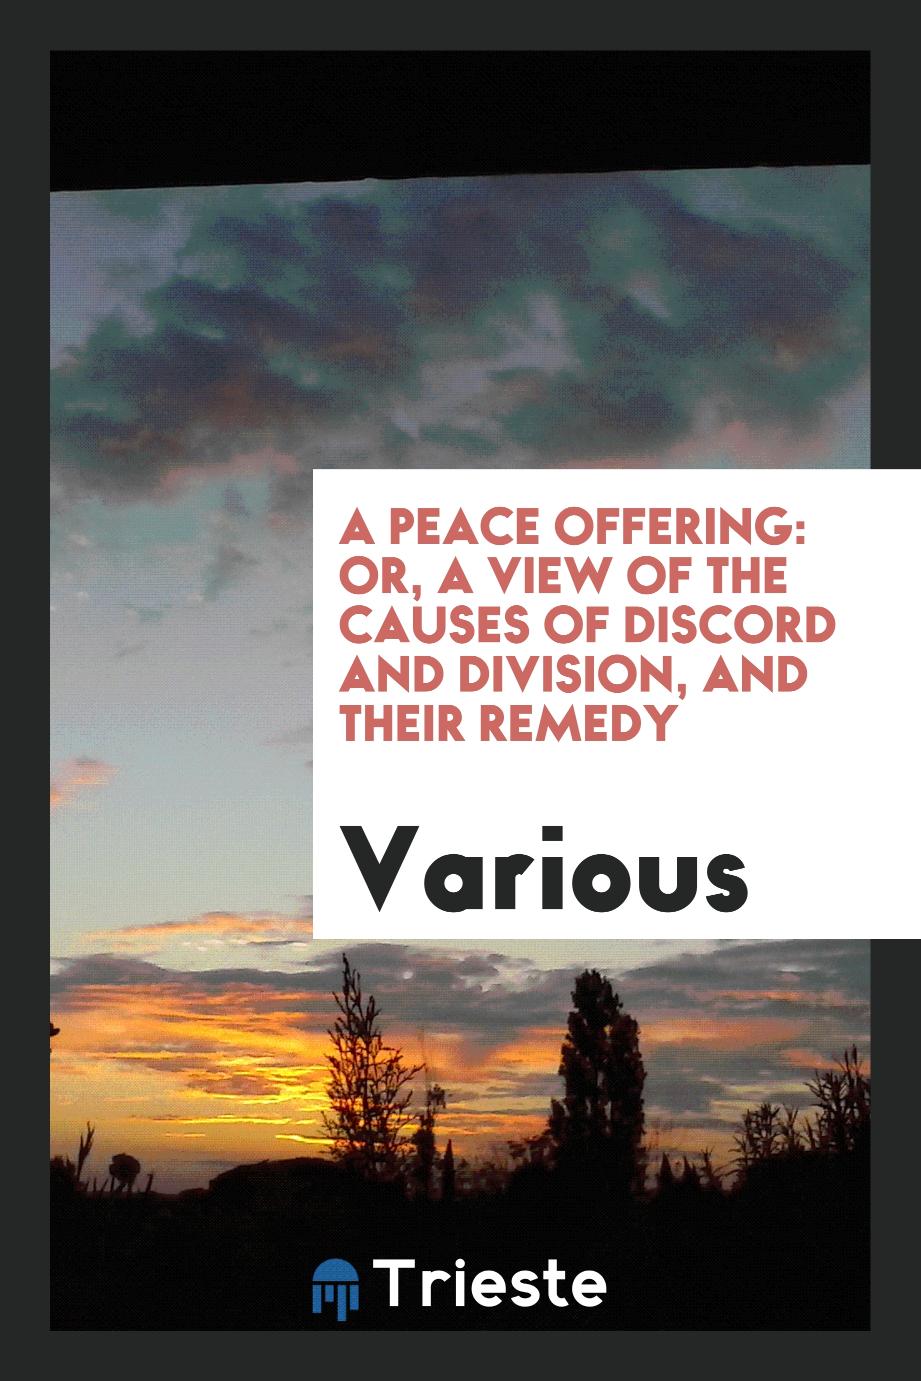 A Peace Offering: Or, a View of the Causes of Discord and Division, and Their Remedy